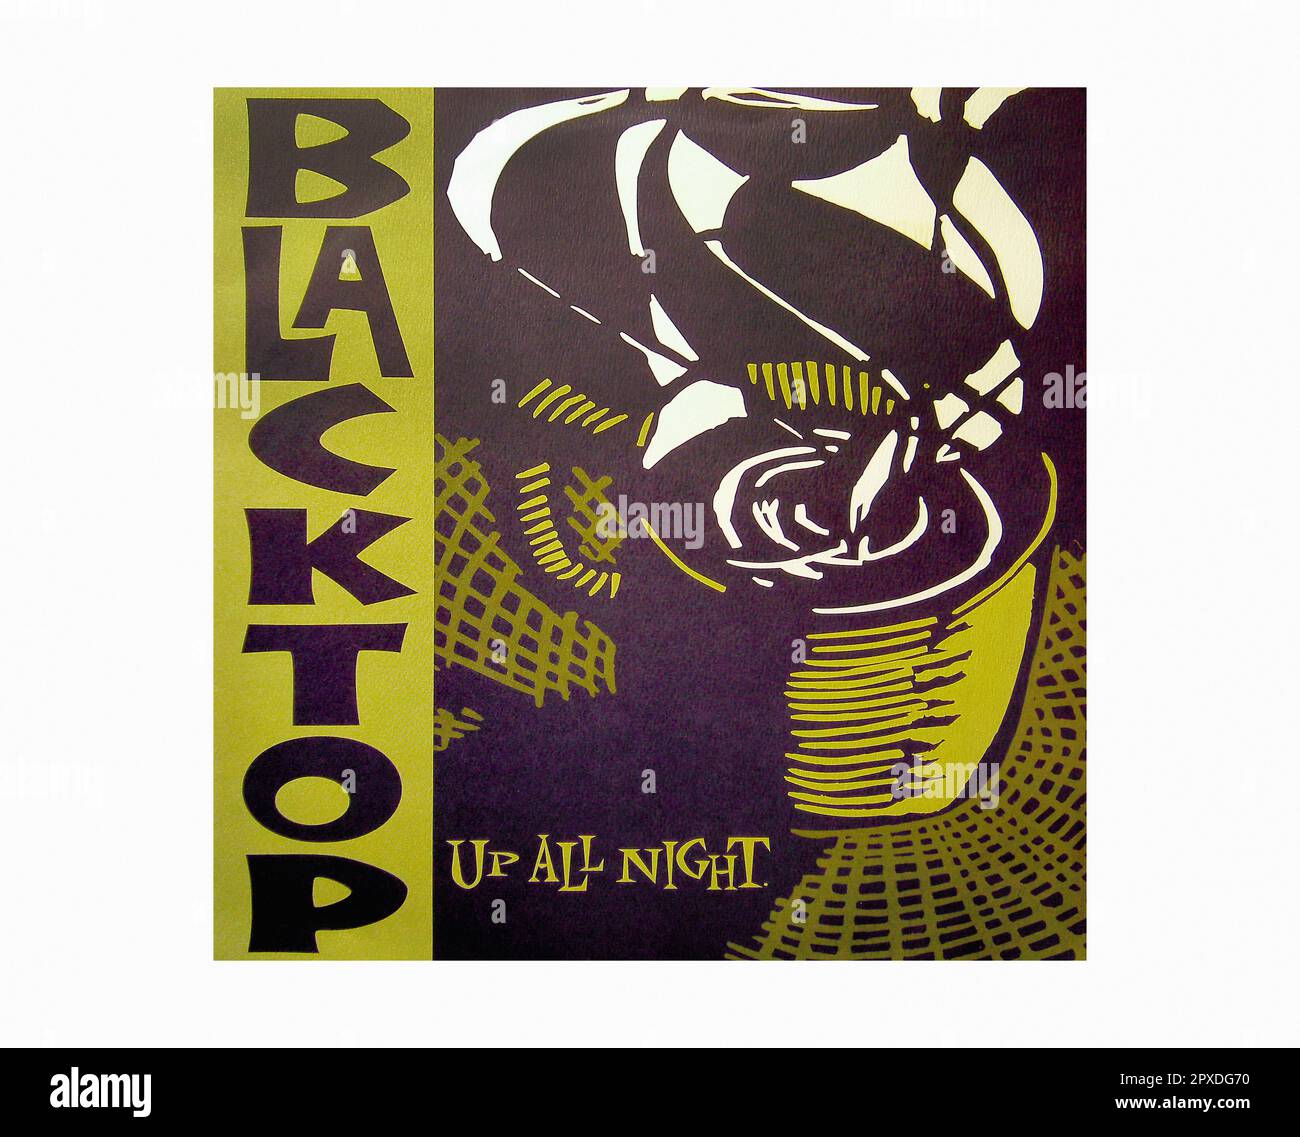 Blacktop - Up All Night [1994] - Vintage Vinyl Record Sleeve Banque D'Images